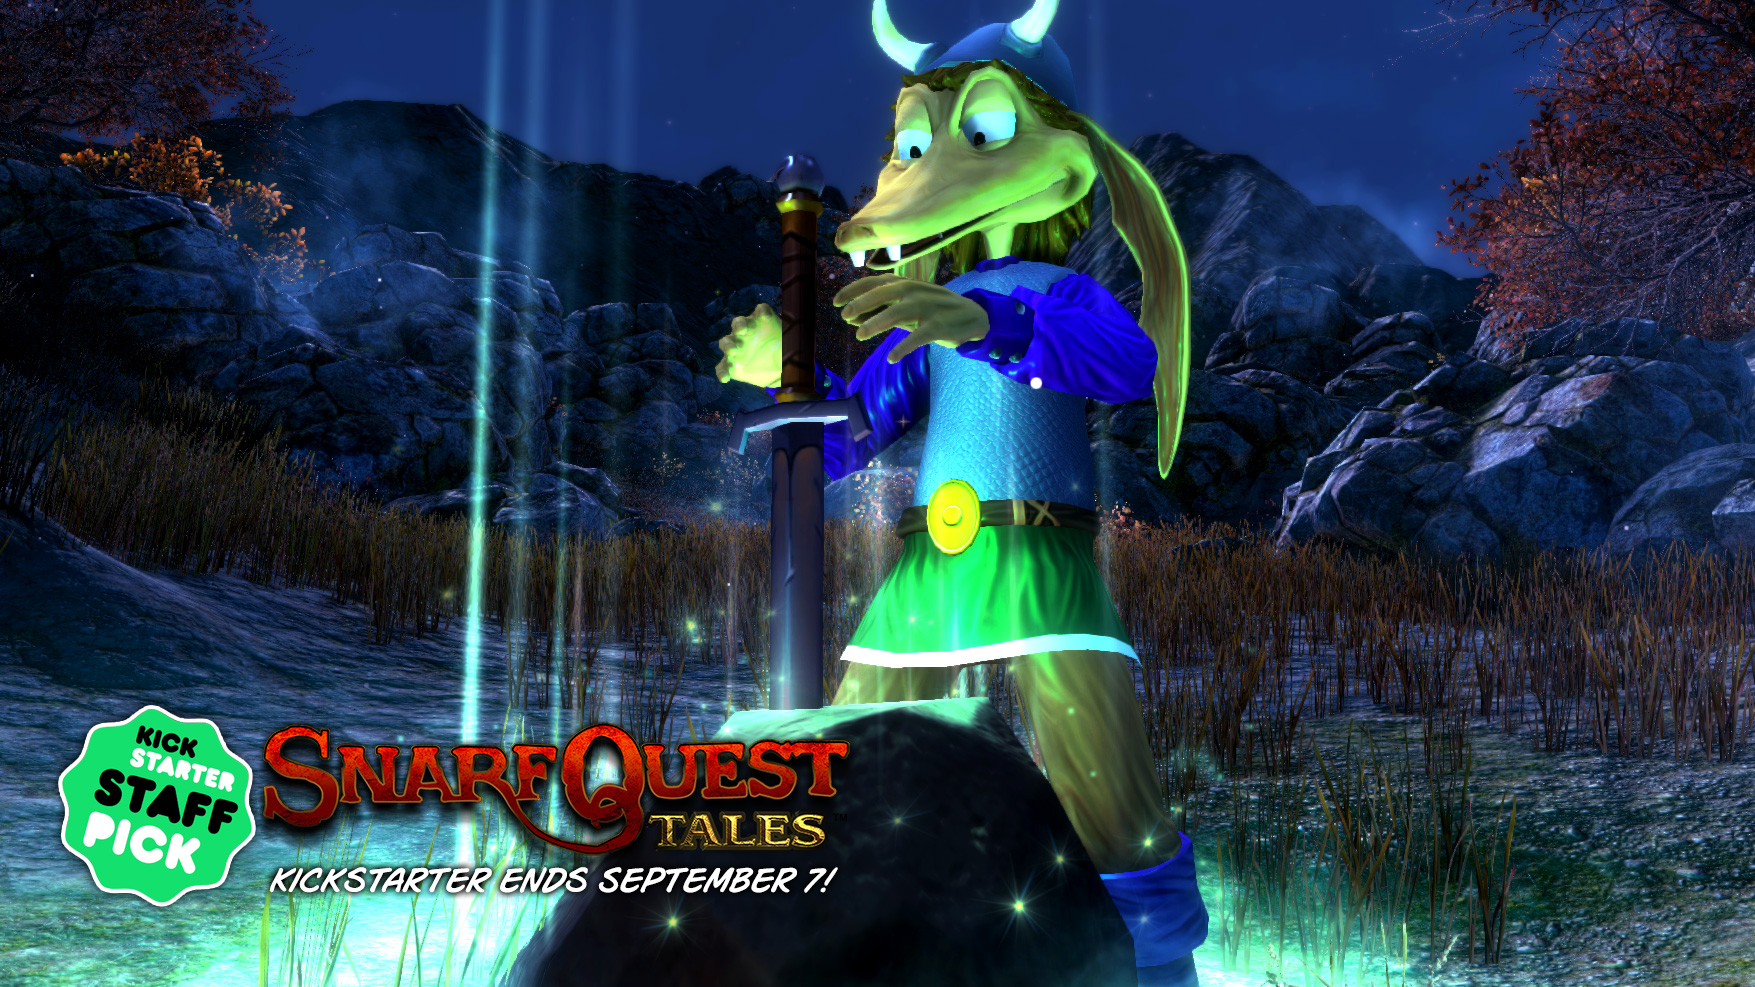 Can Snarf remove the sword from the stone? (Probably not, but he might as well try for a shot at free treasure!)